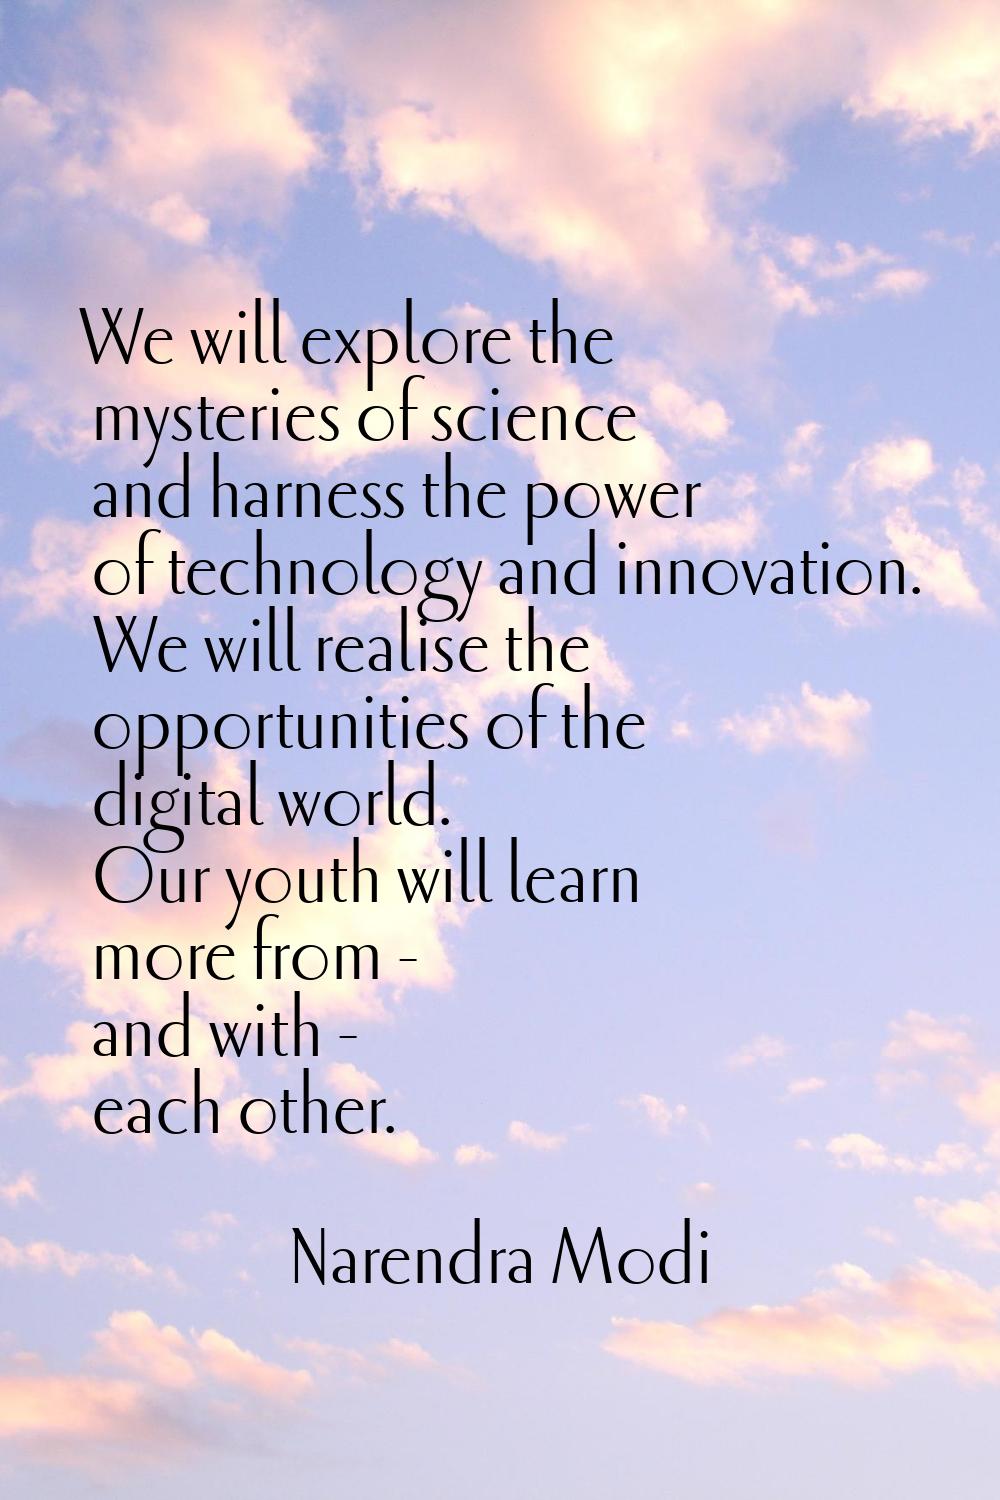 We will explore the mysteries of science and harness the power of technology and innovation. We wil